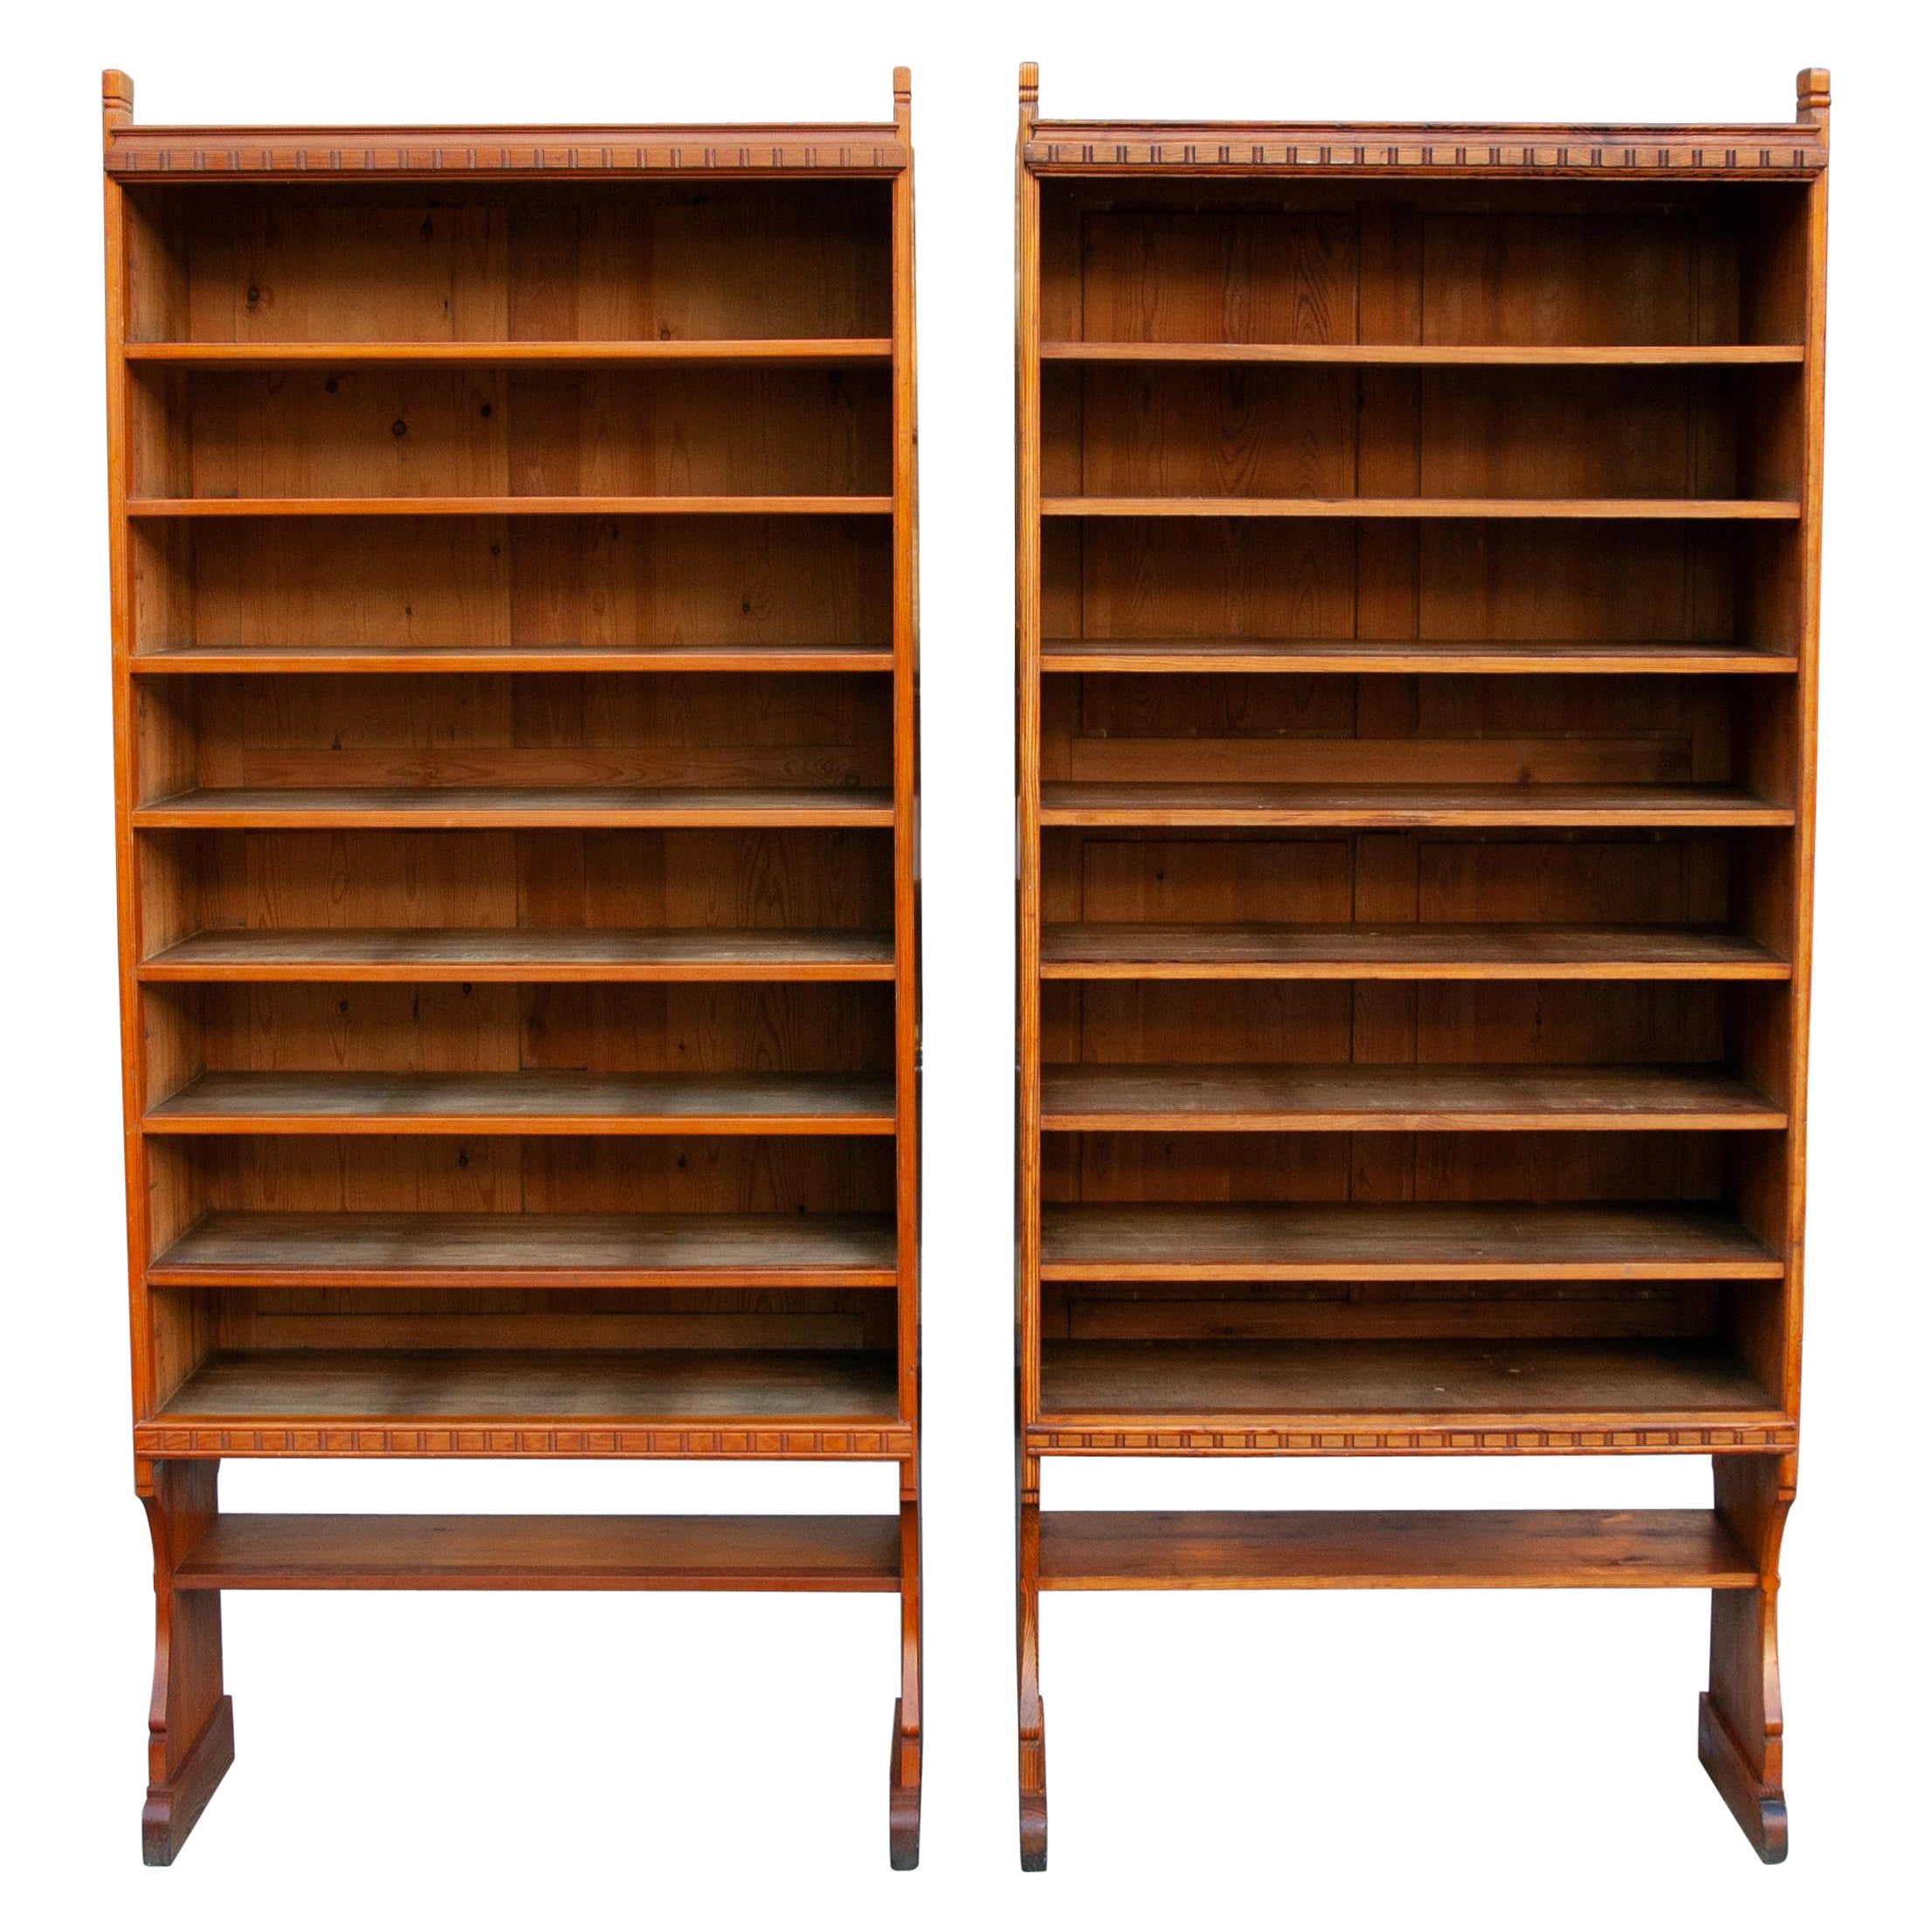 Pair of Skønvirke Cabinets, by Martin Nyrop Denmark, 1900